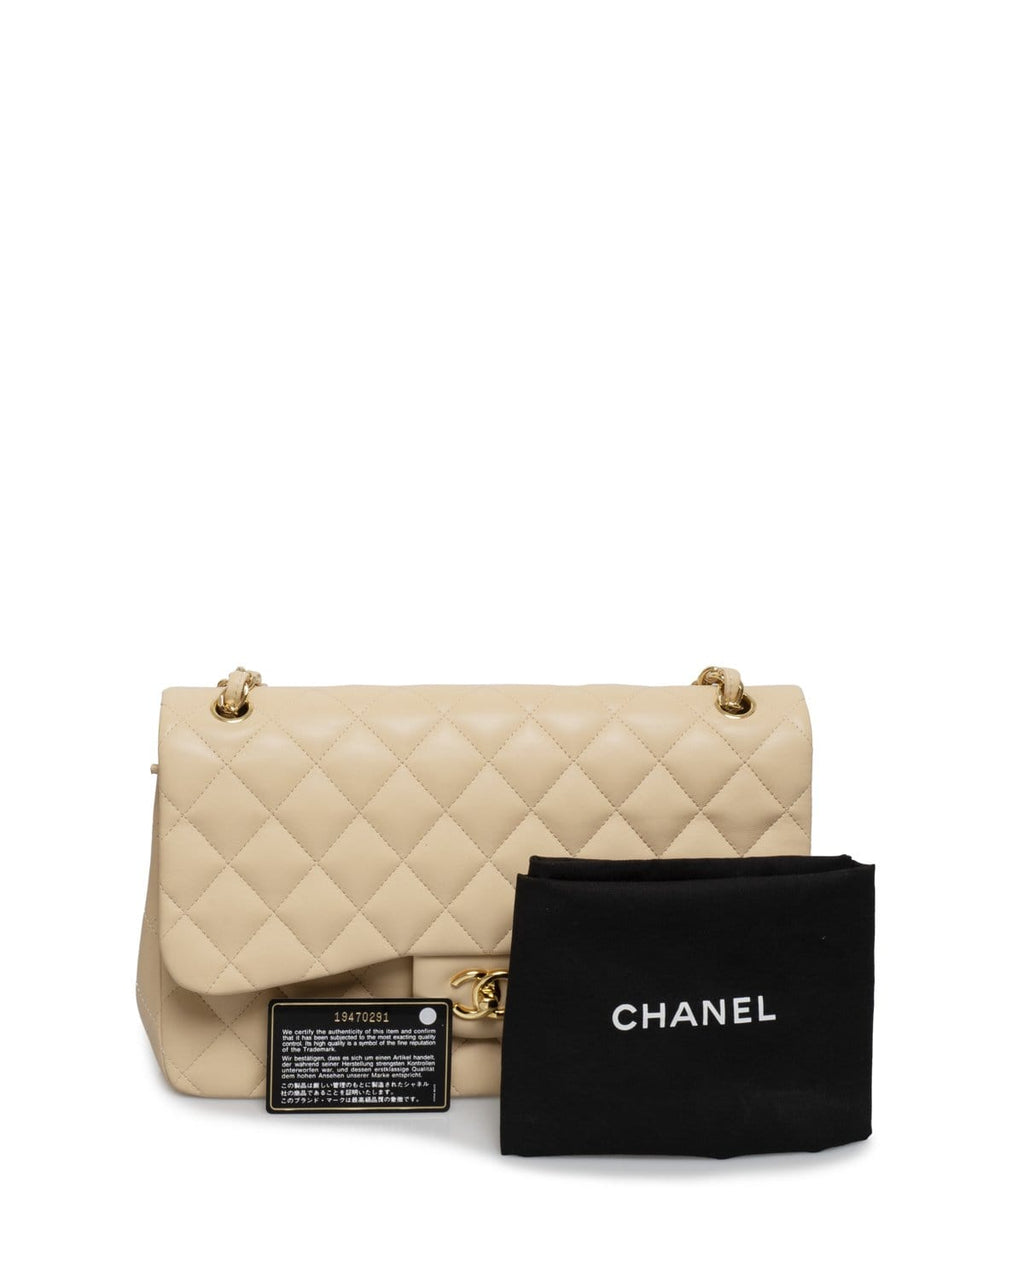 CHANEL, Bags, Authenticity Guarantee Chanel Cc Double Chain Shoulder Tote  Bag Purse Clear Gold